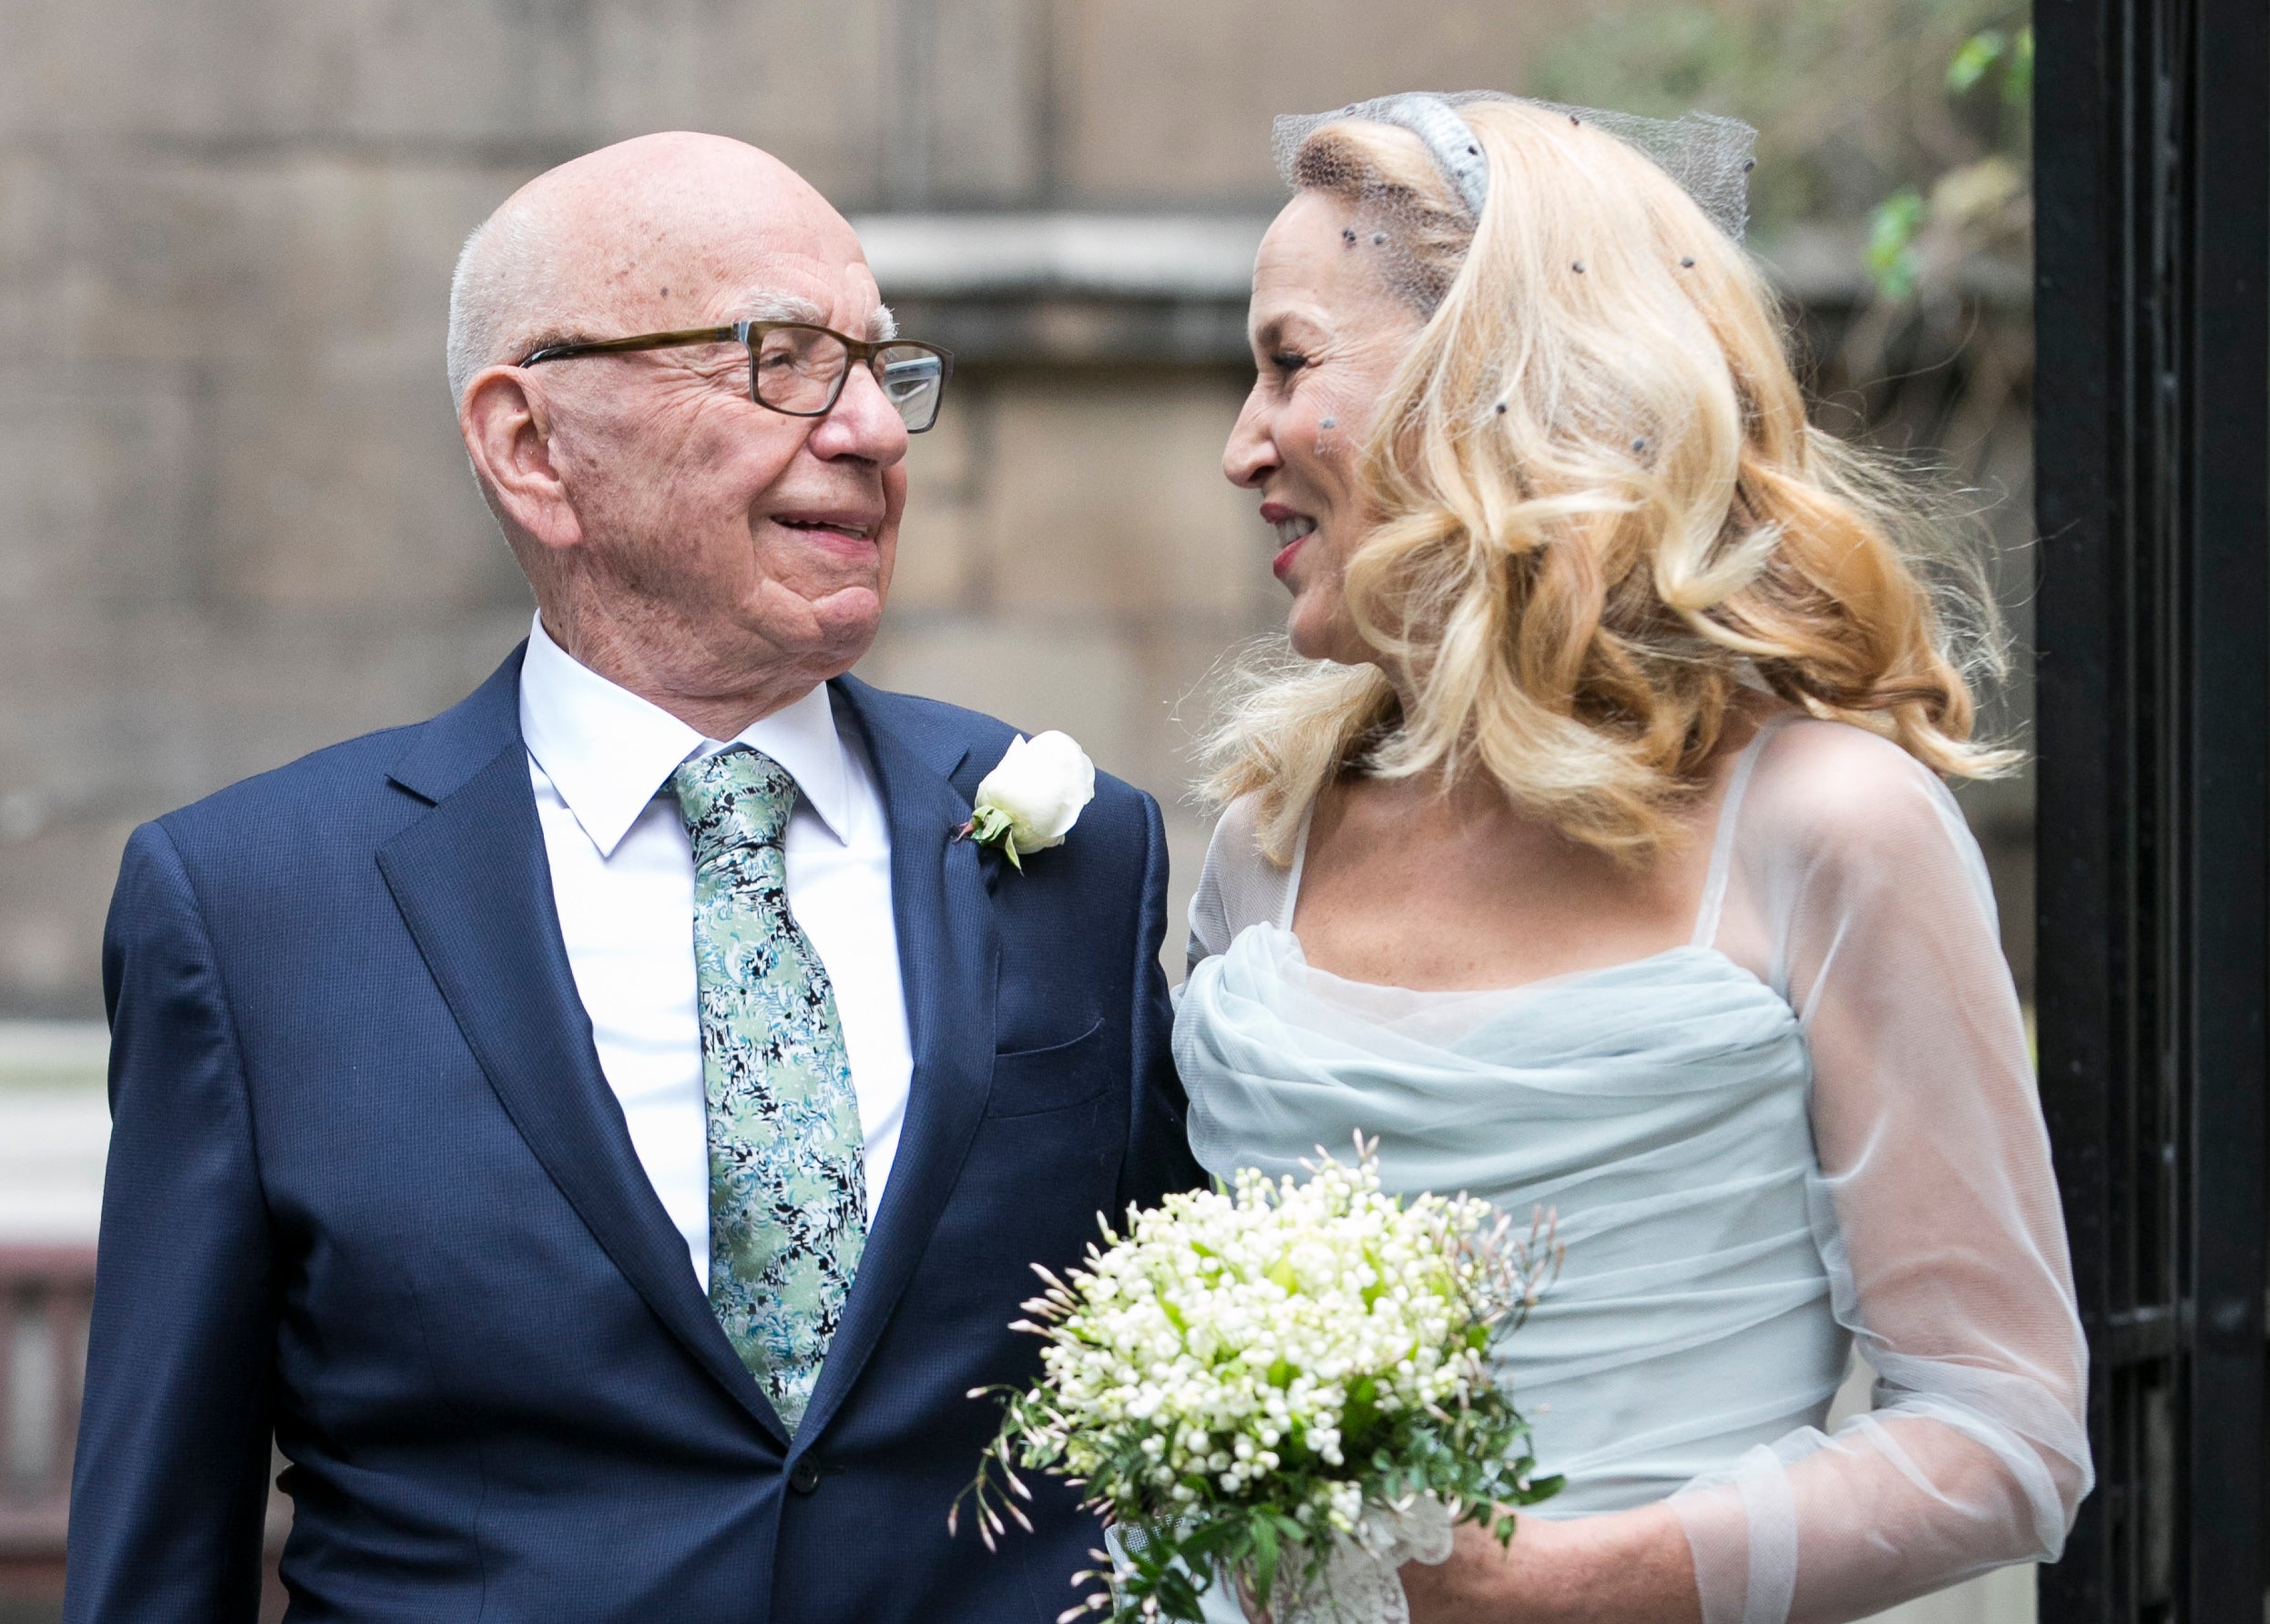 Rupert Murdoch and Jerry Hall seen leaving St Bride’s Church after their wedding on March 5, 2016 in London, England